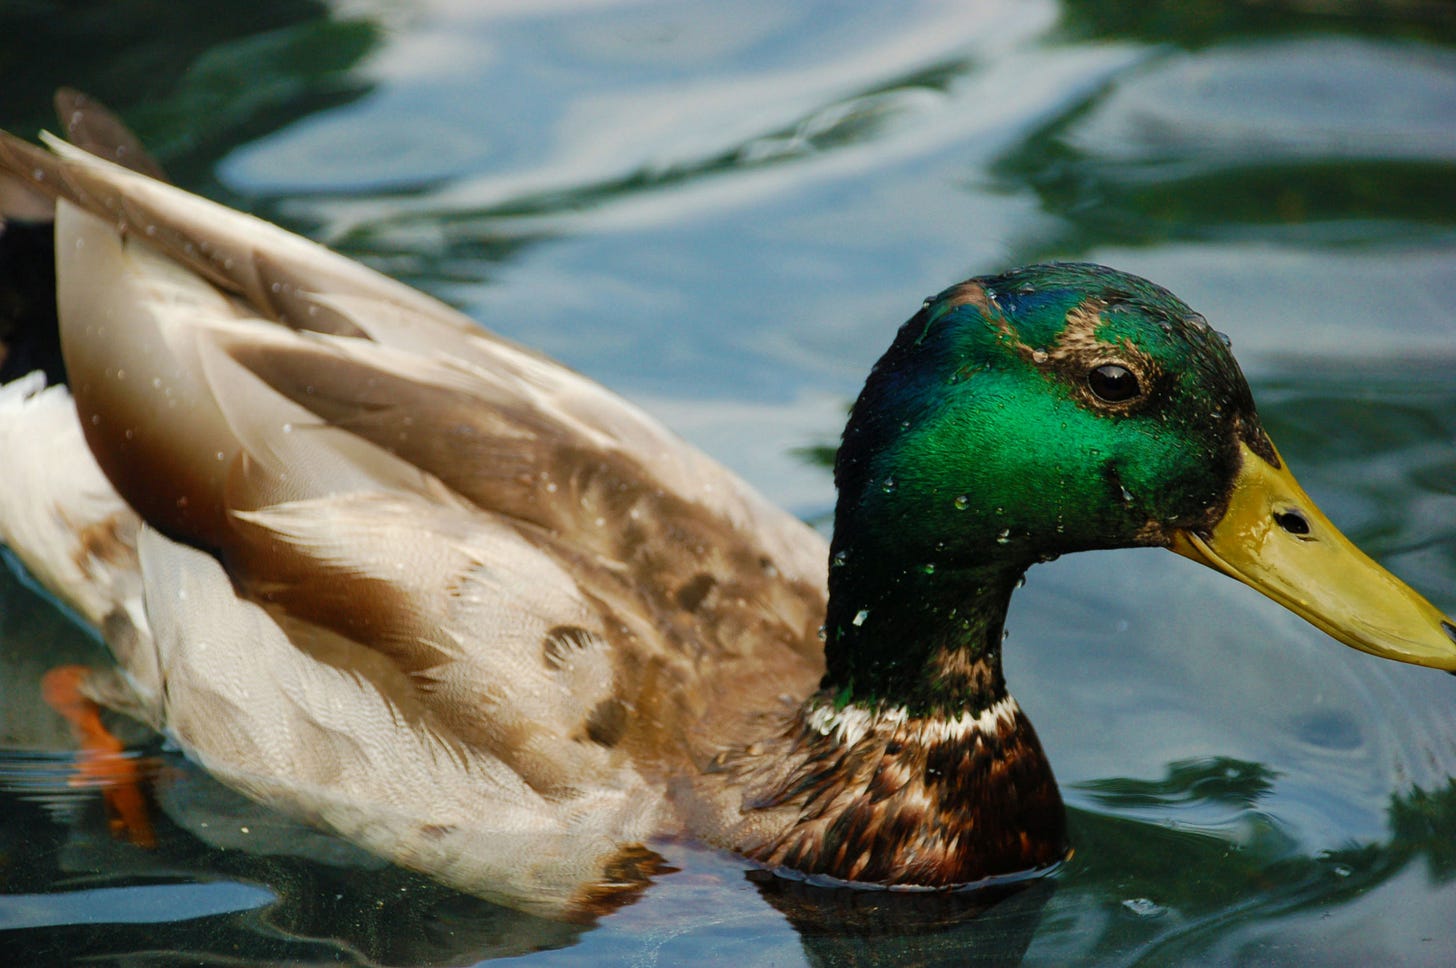 A duck with a green head and a yellow beak swimming in water.